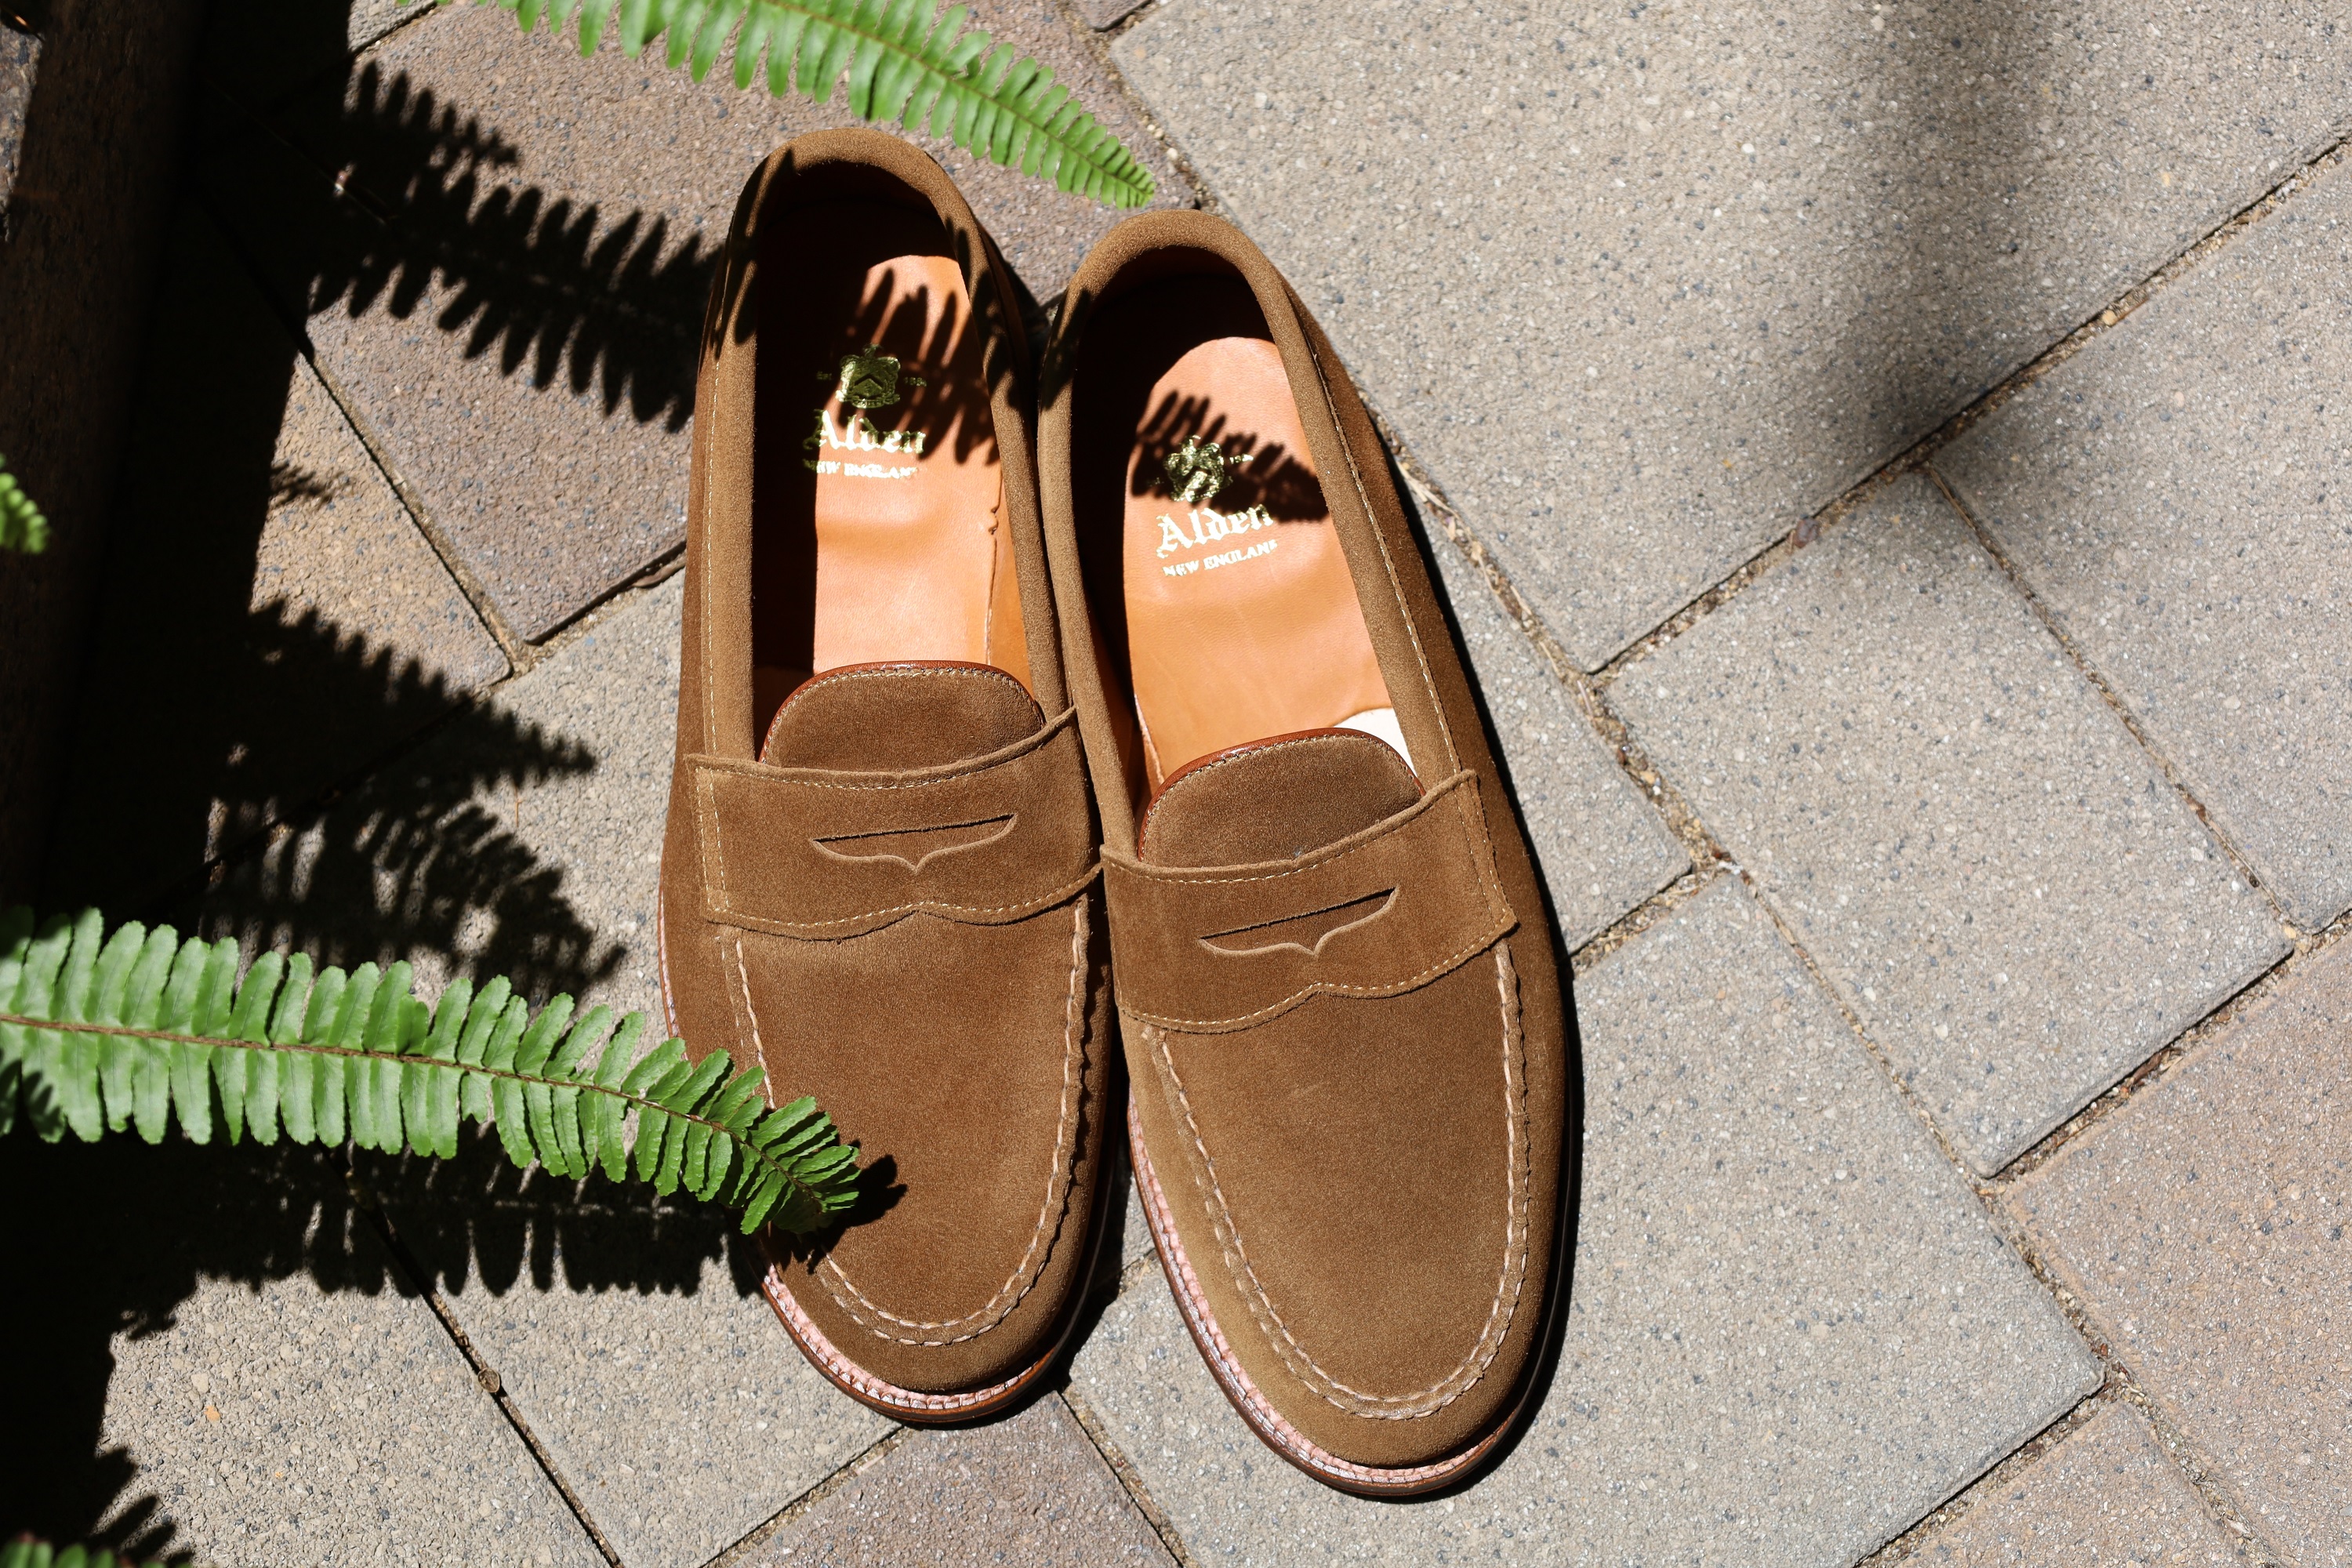 ALDEN N0204 SNUFF SUEDE PENNY LOAFER | JOURNAL | THE LAKOTA HOUSE